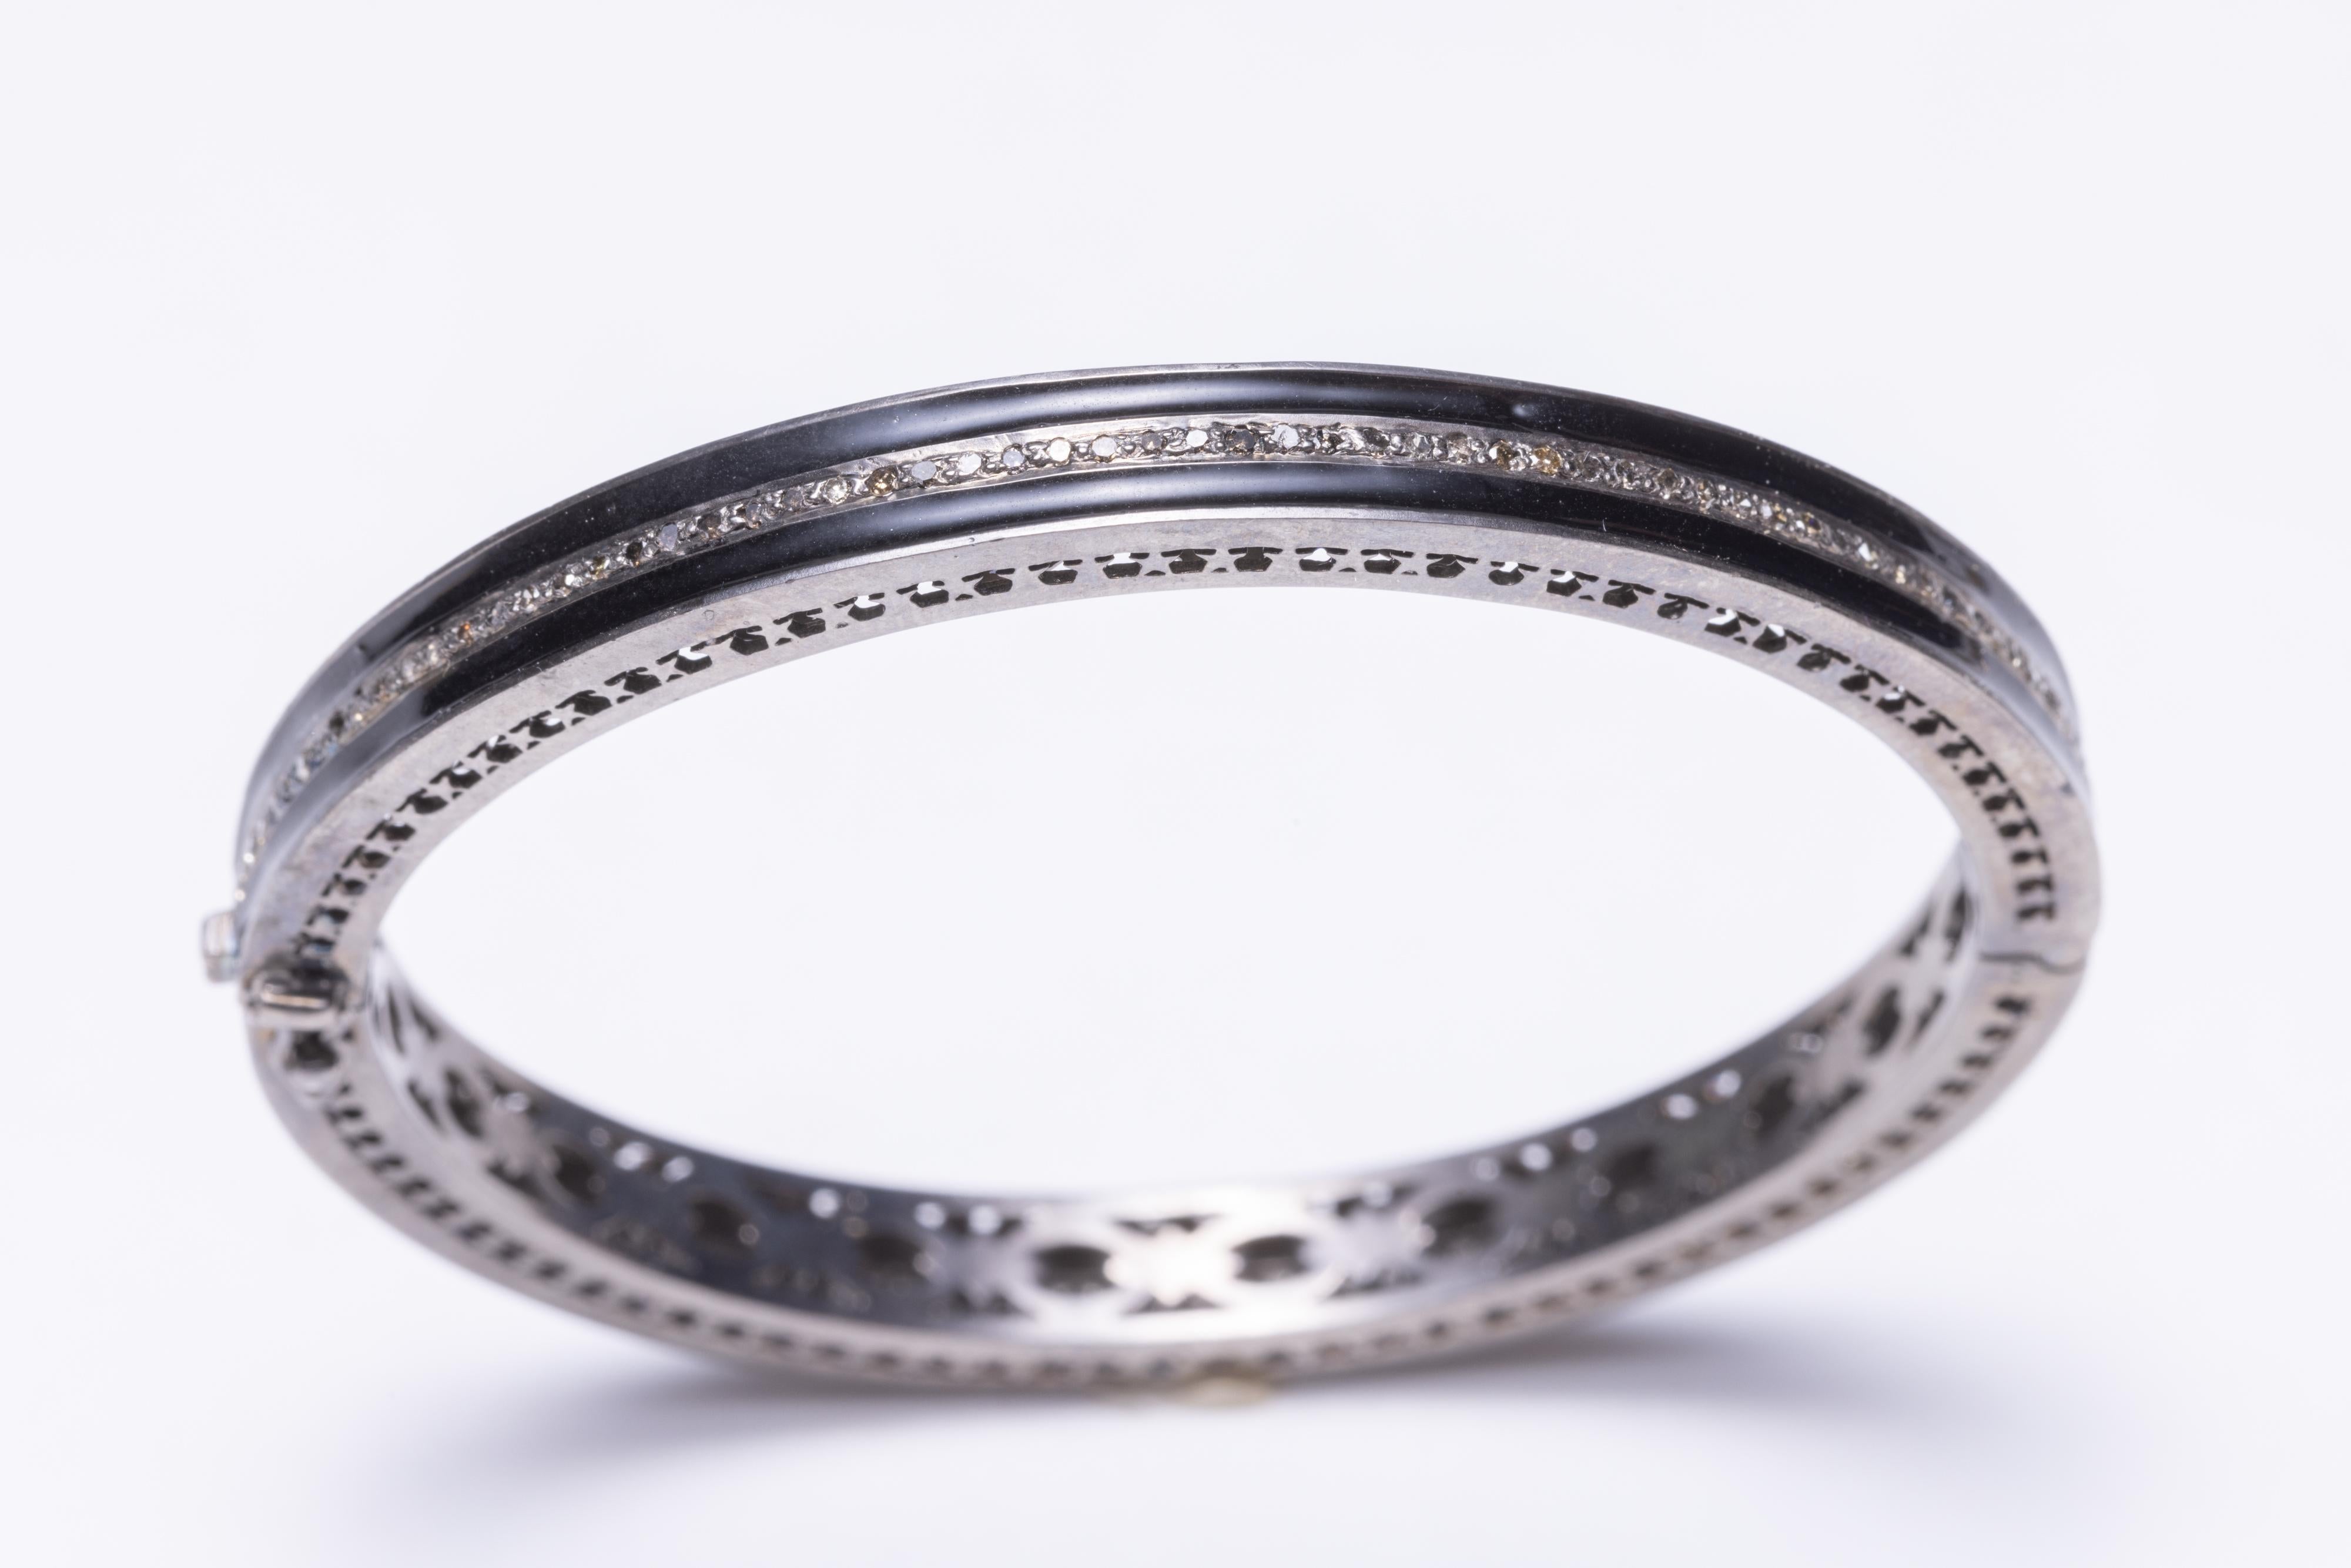 Black Enamel and Diamond Bangle Bracelet In Excellent Condition For Sale In Nantucket, MA